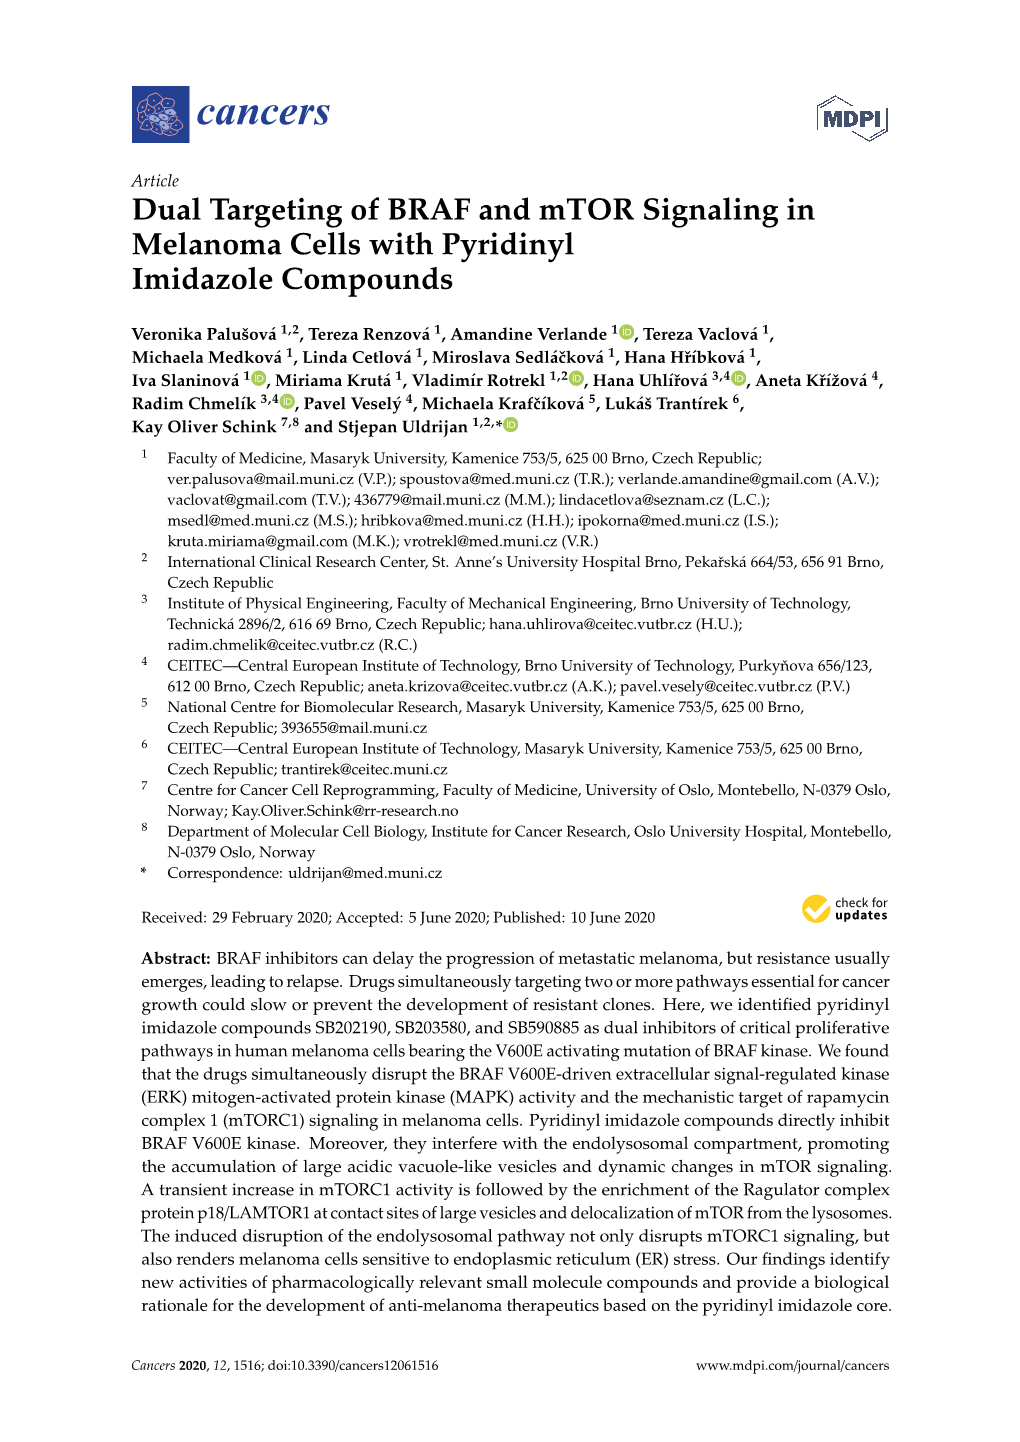 Dual Targeting of BRAF and Mtor Signaling in Melanoma Cells with Pyridinyl Imidazole Compounds